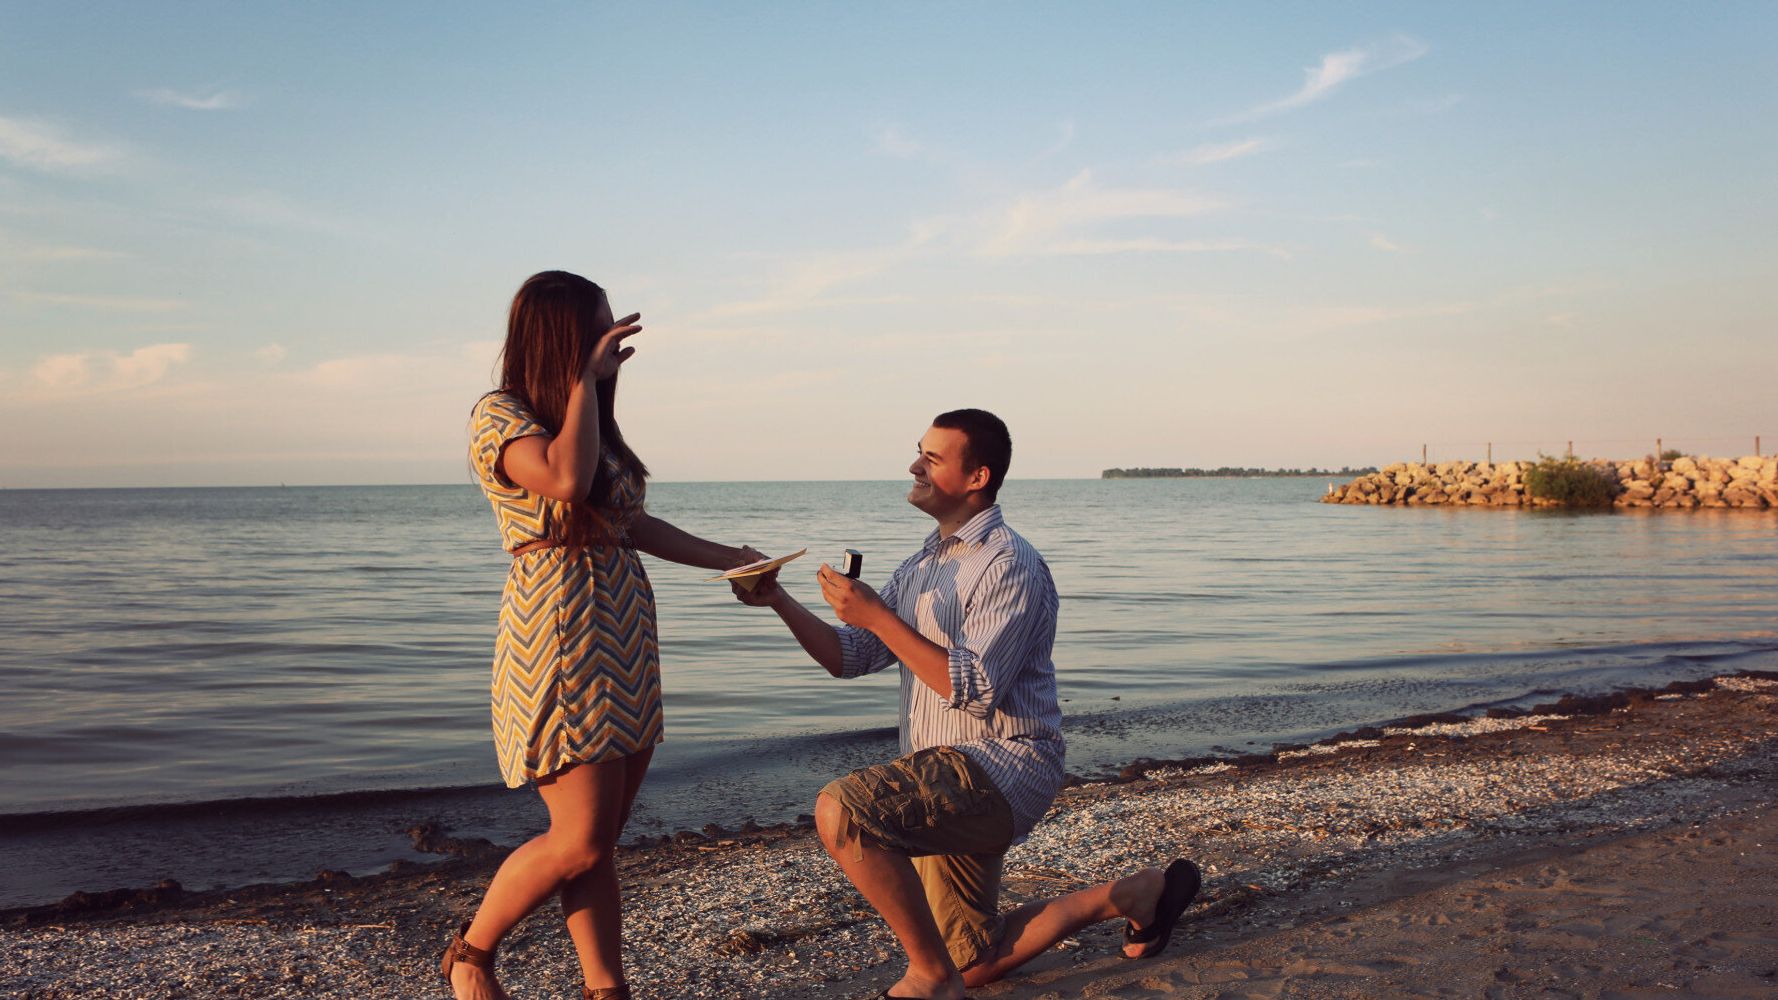 Wedding Proposal Generator Is The Perfect Tool For Clueless Grooms 3626